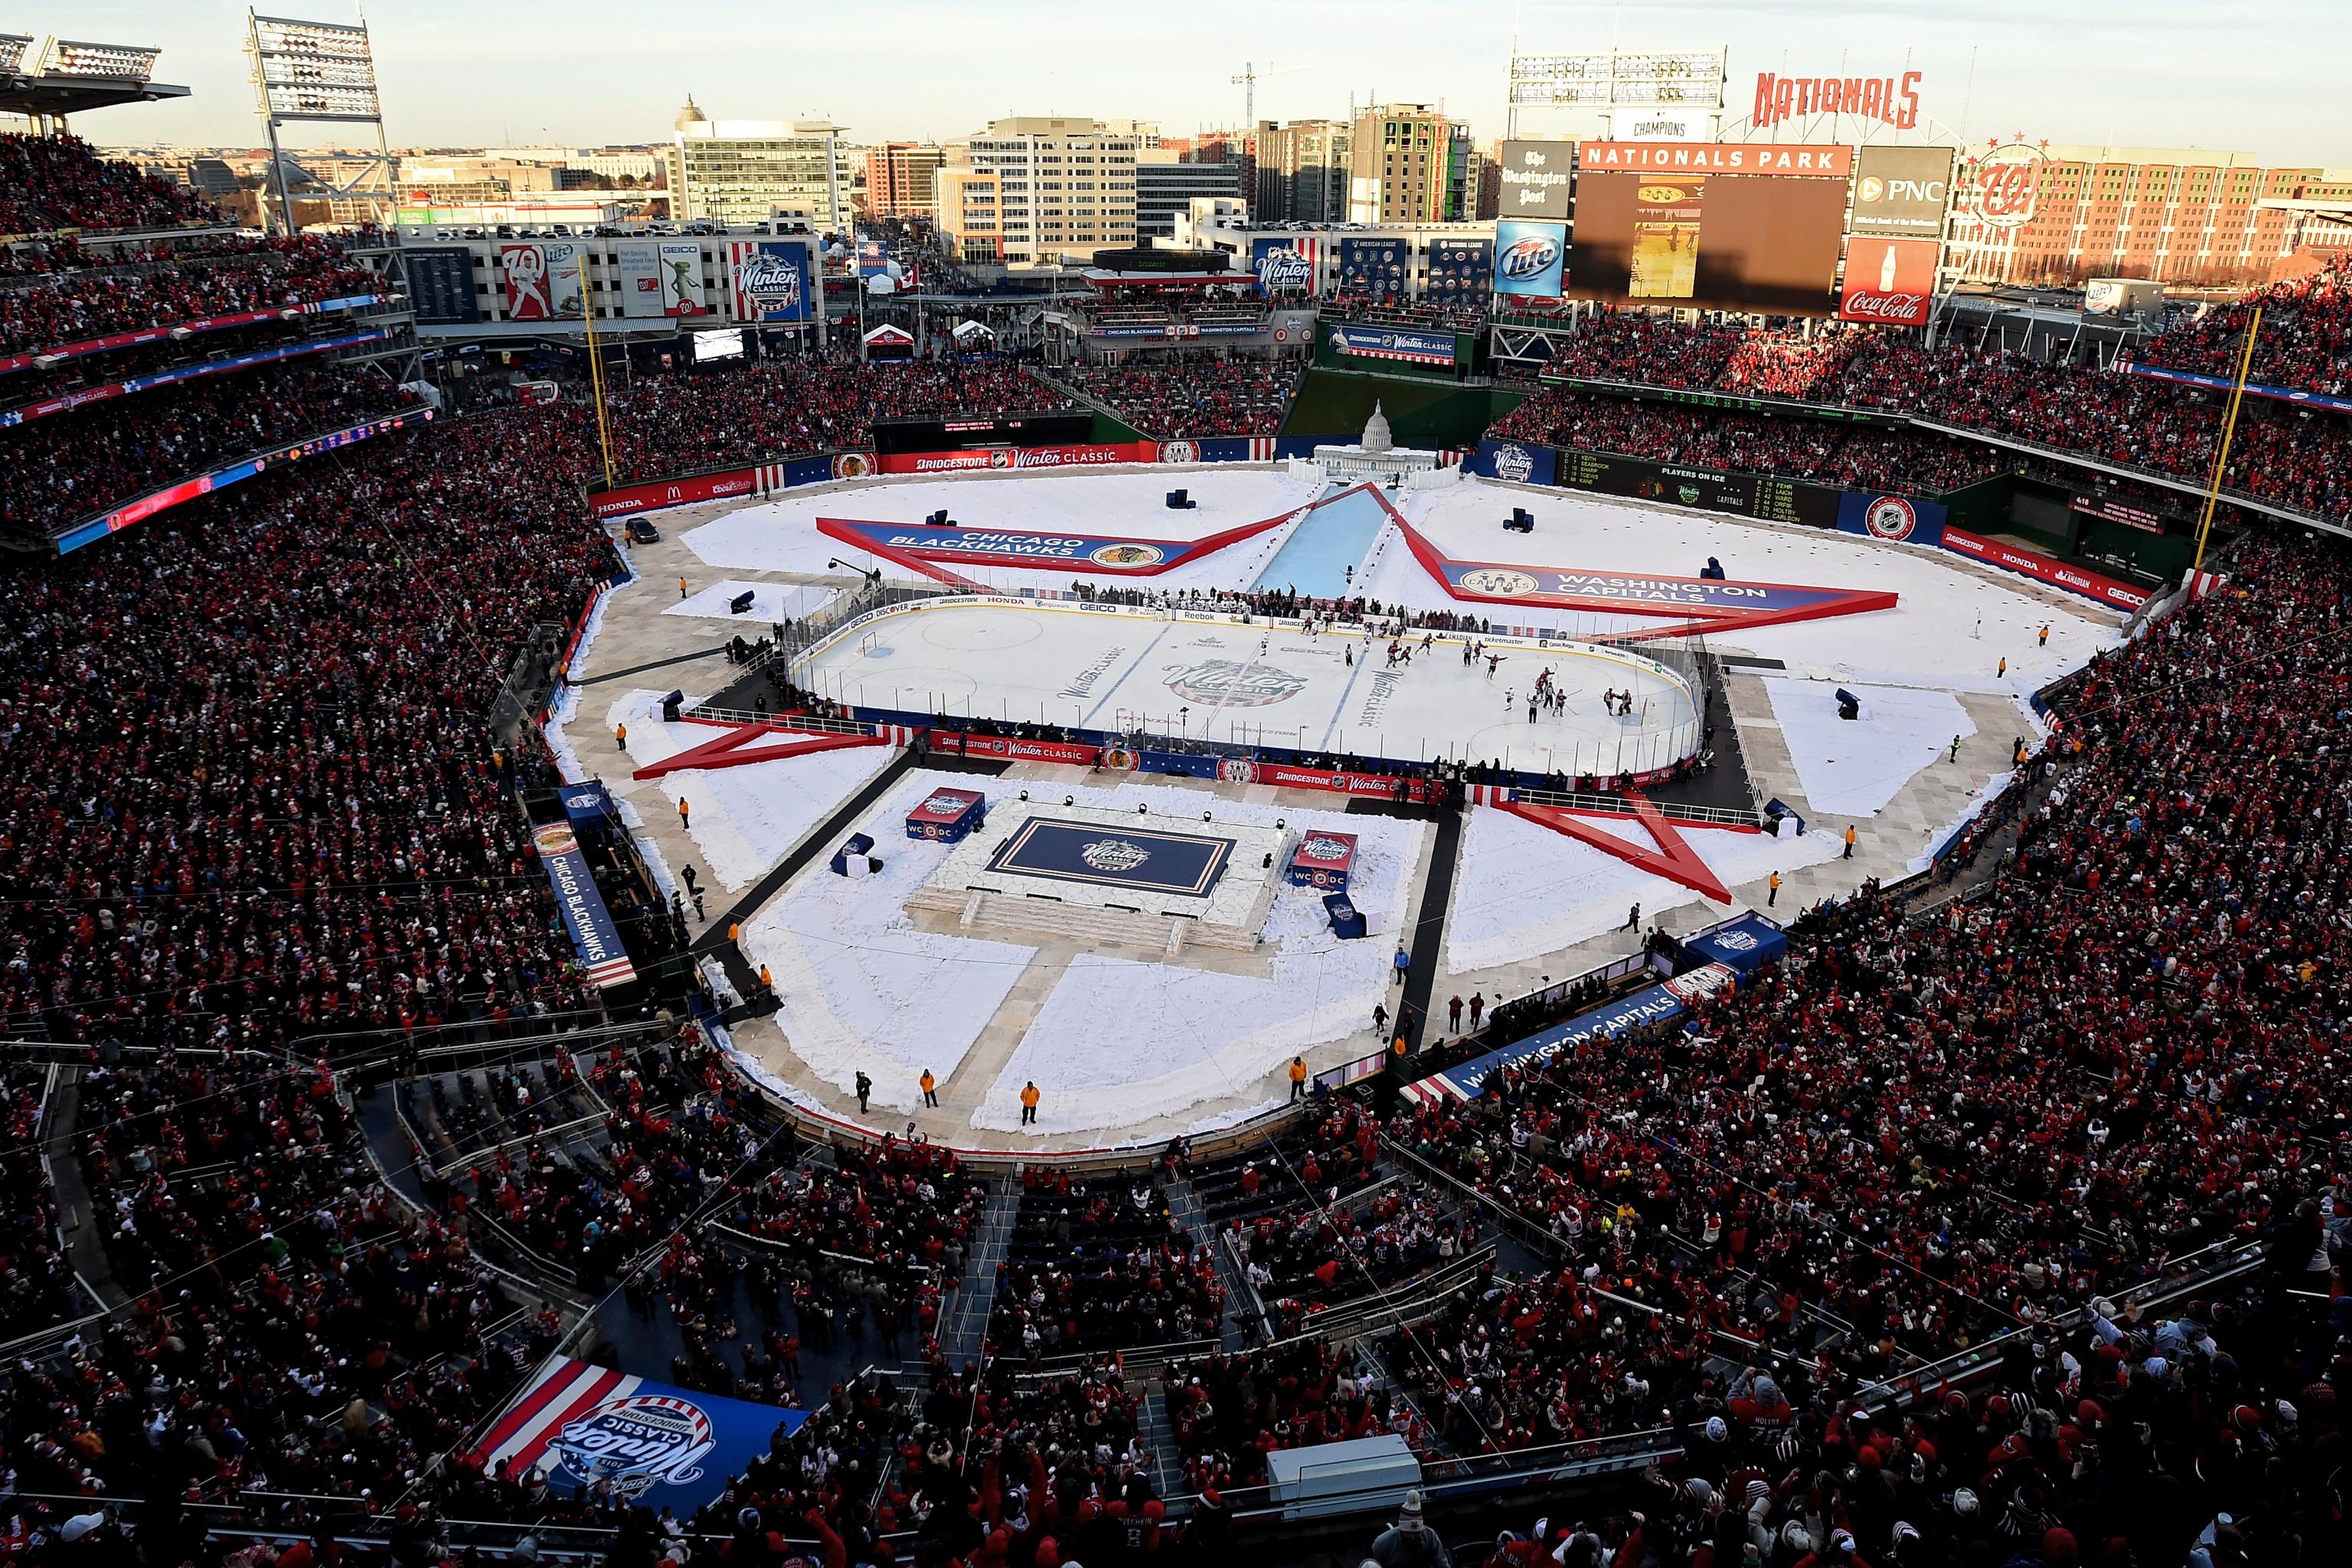 Winter Classic 2015: Troy Brouwer's Goal Lifts Capitals Over Blackhawks -  The New York Times